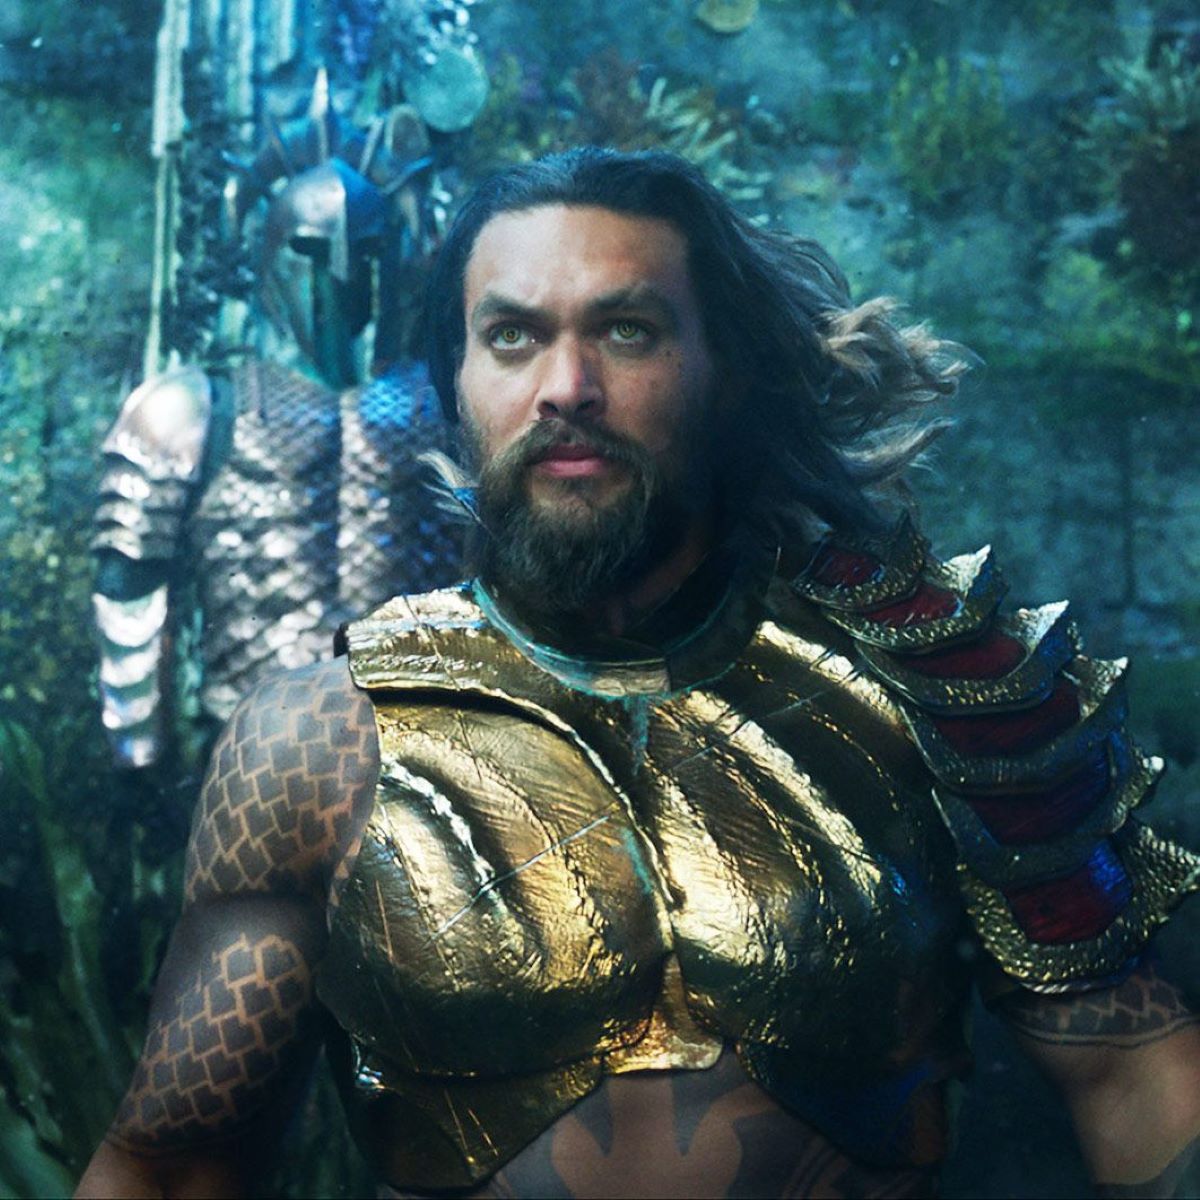 Aquaman 2 Teaser Released Despite Rumors: What Can Fans Expect?